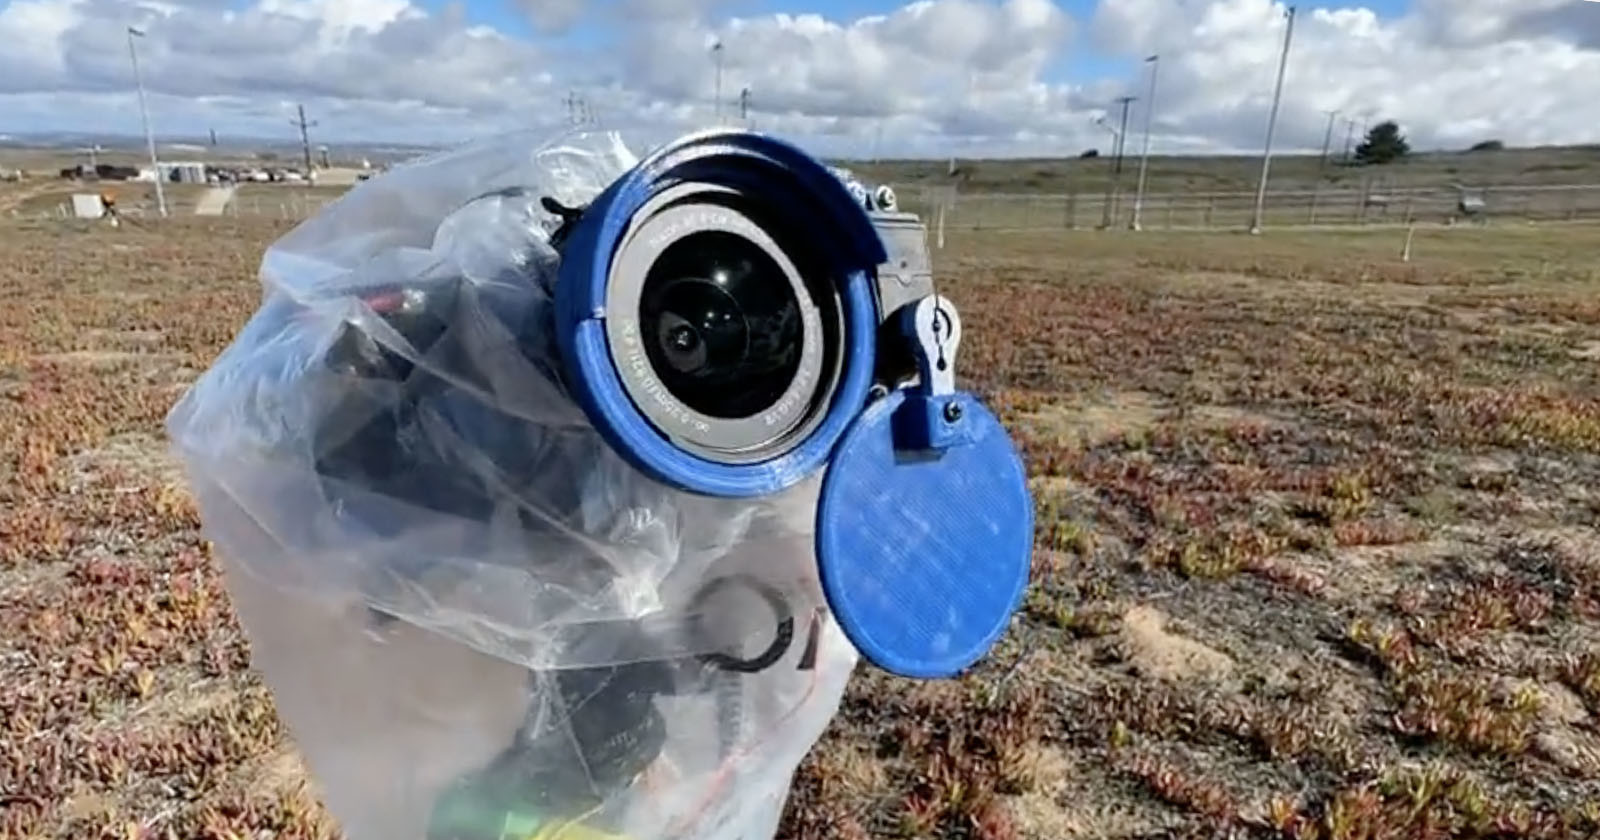 Photographer’s Automatic Lens Cap Shields Camera During Rocket Launches